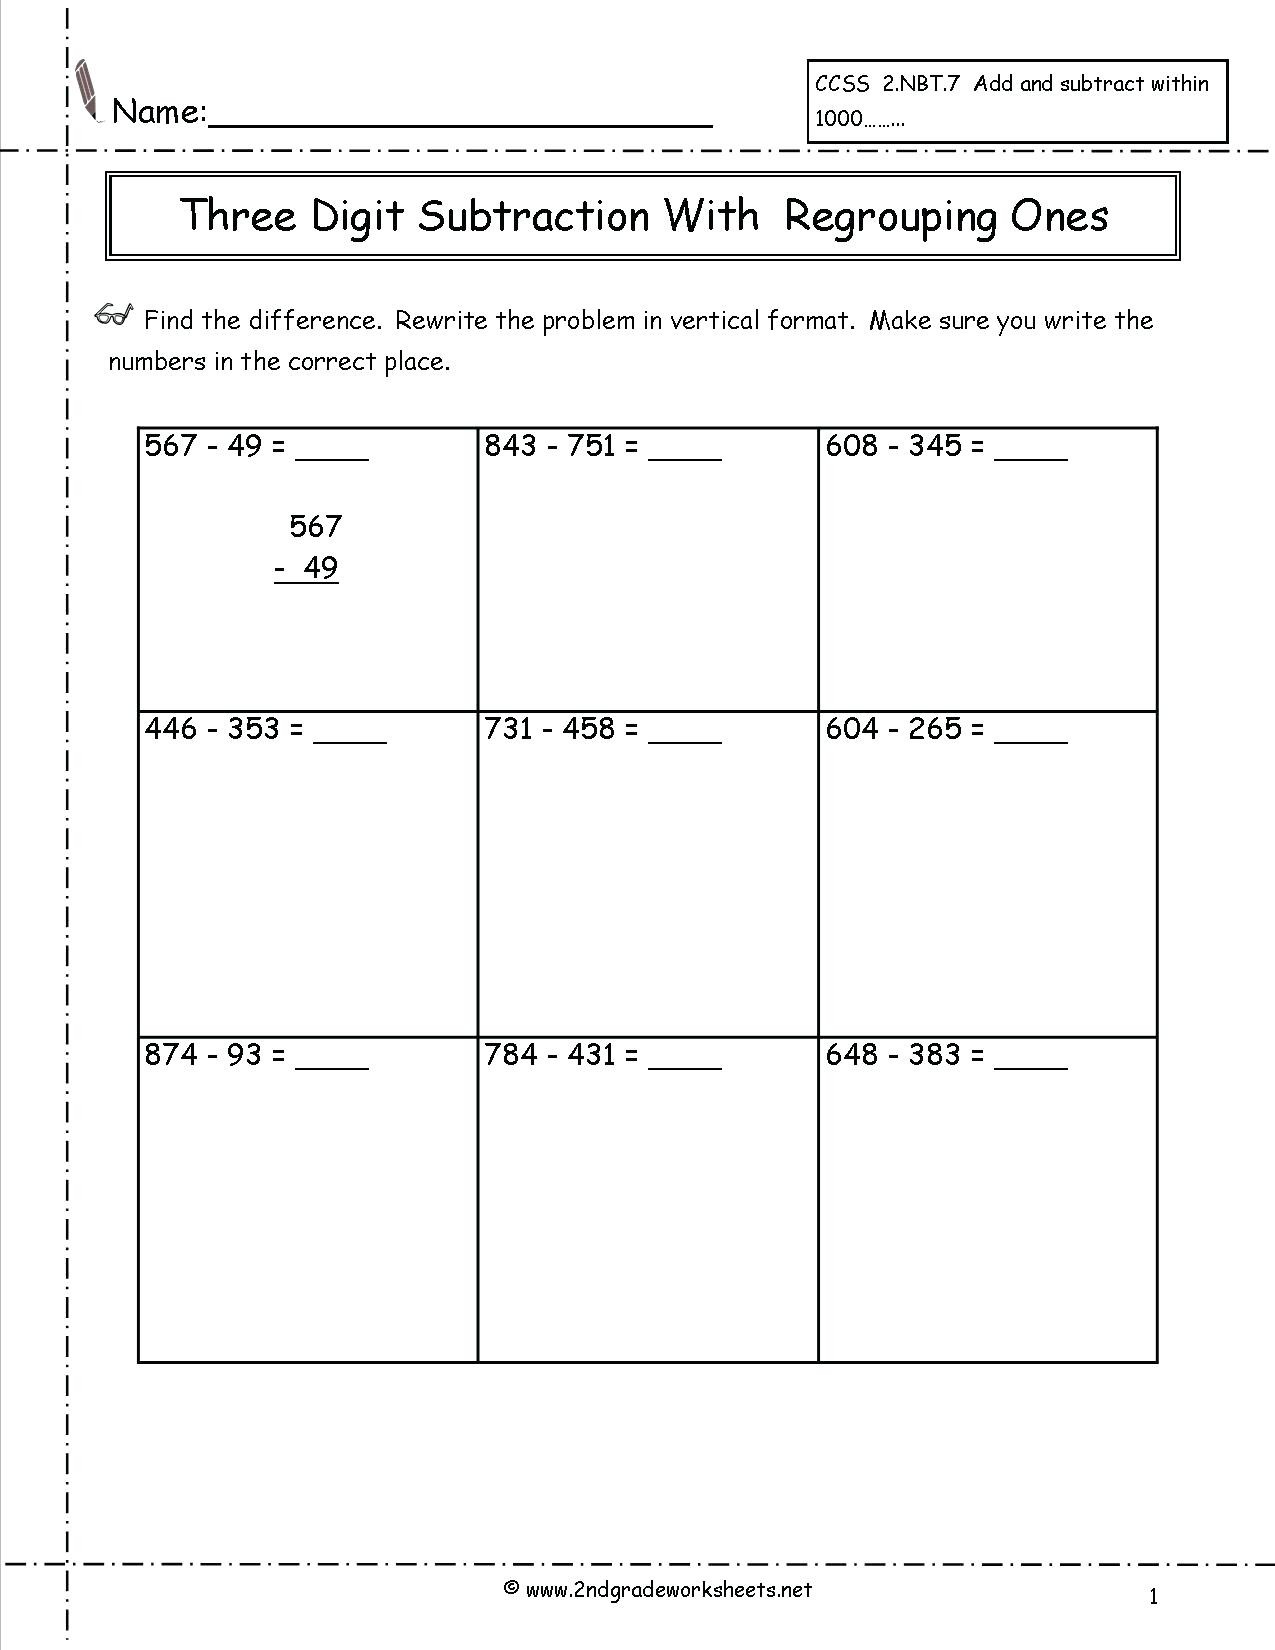 subtraction with regrouping worksheets three digit subtraction horizontal to vertical worksheet subtraction regrouping worksheets